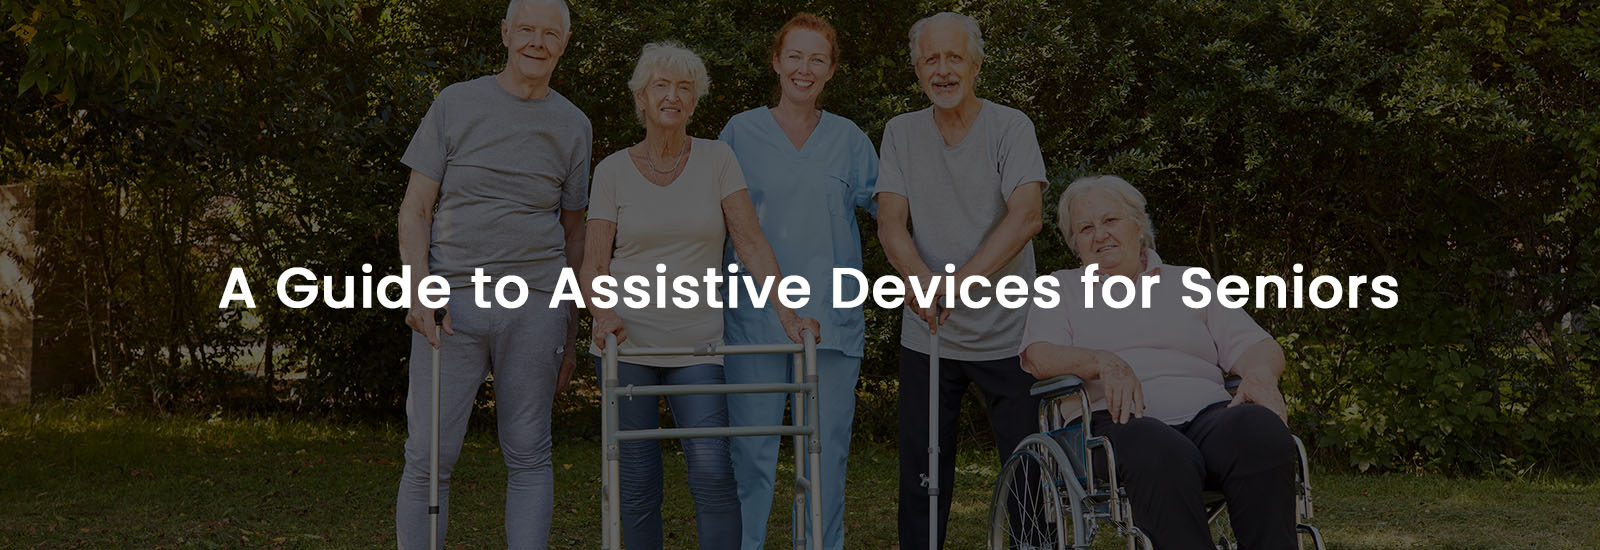 A Guide to Assistive Devices for Seniors | Banner Image